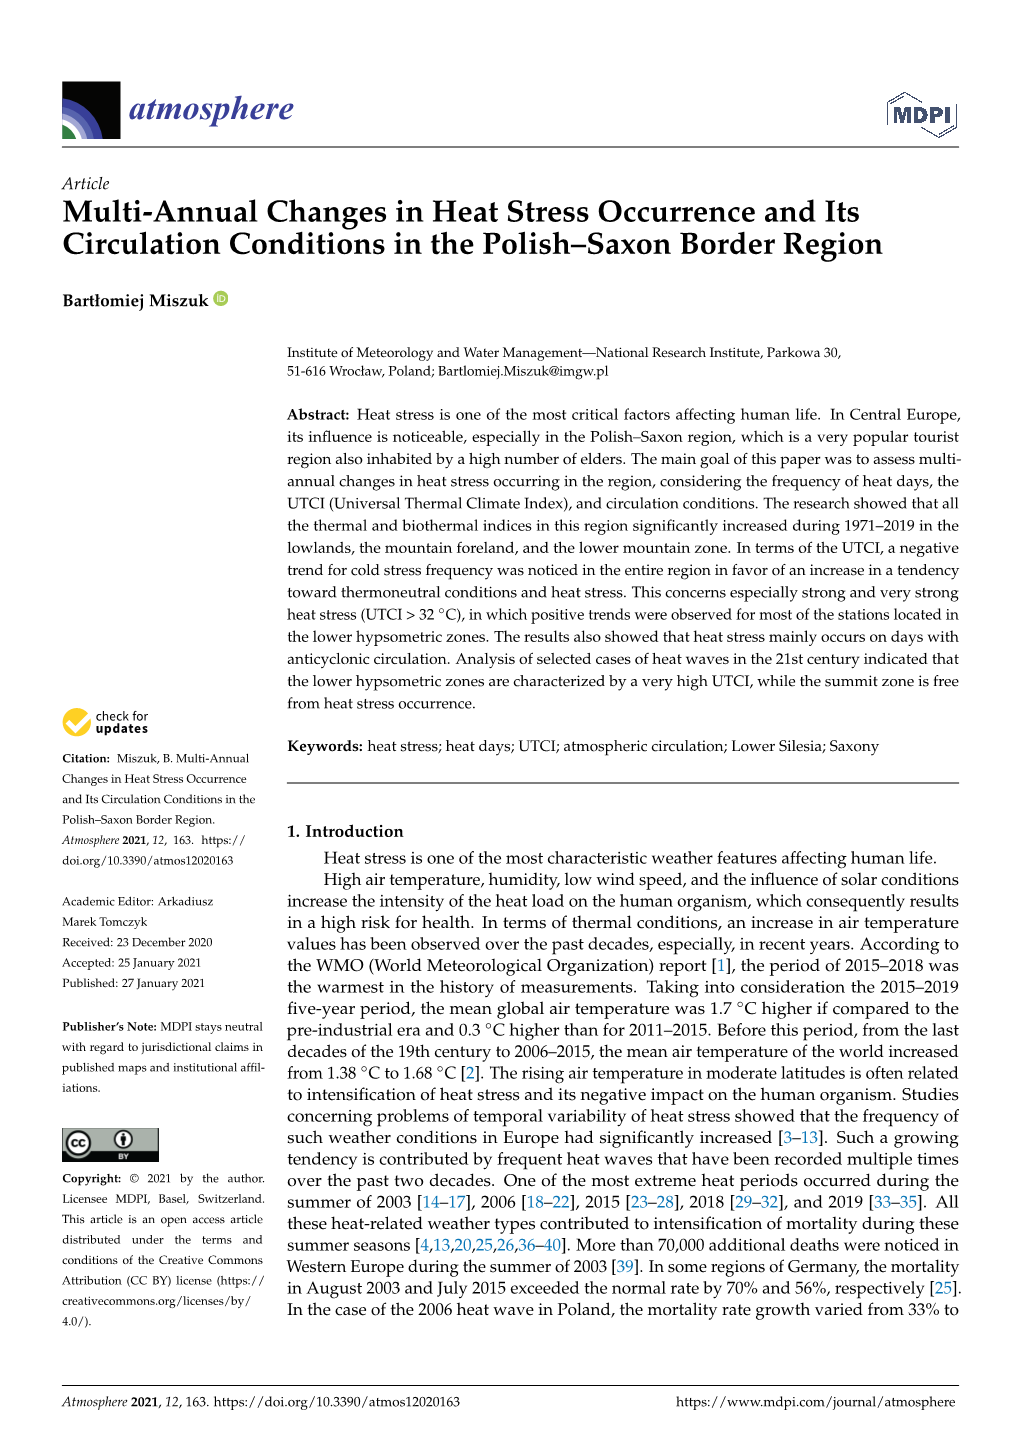 Multi-Annual Changes in Heat Stress Occurrence and Its Circulation Conditions in the Polish–Saxon Border Region